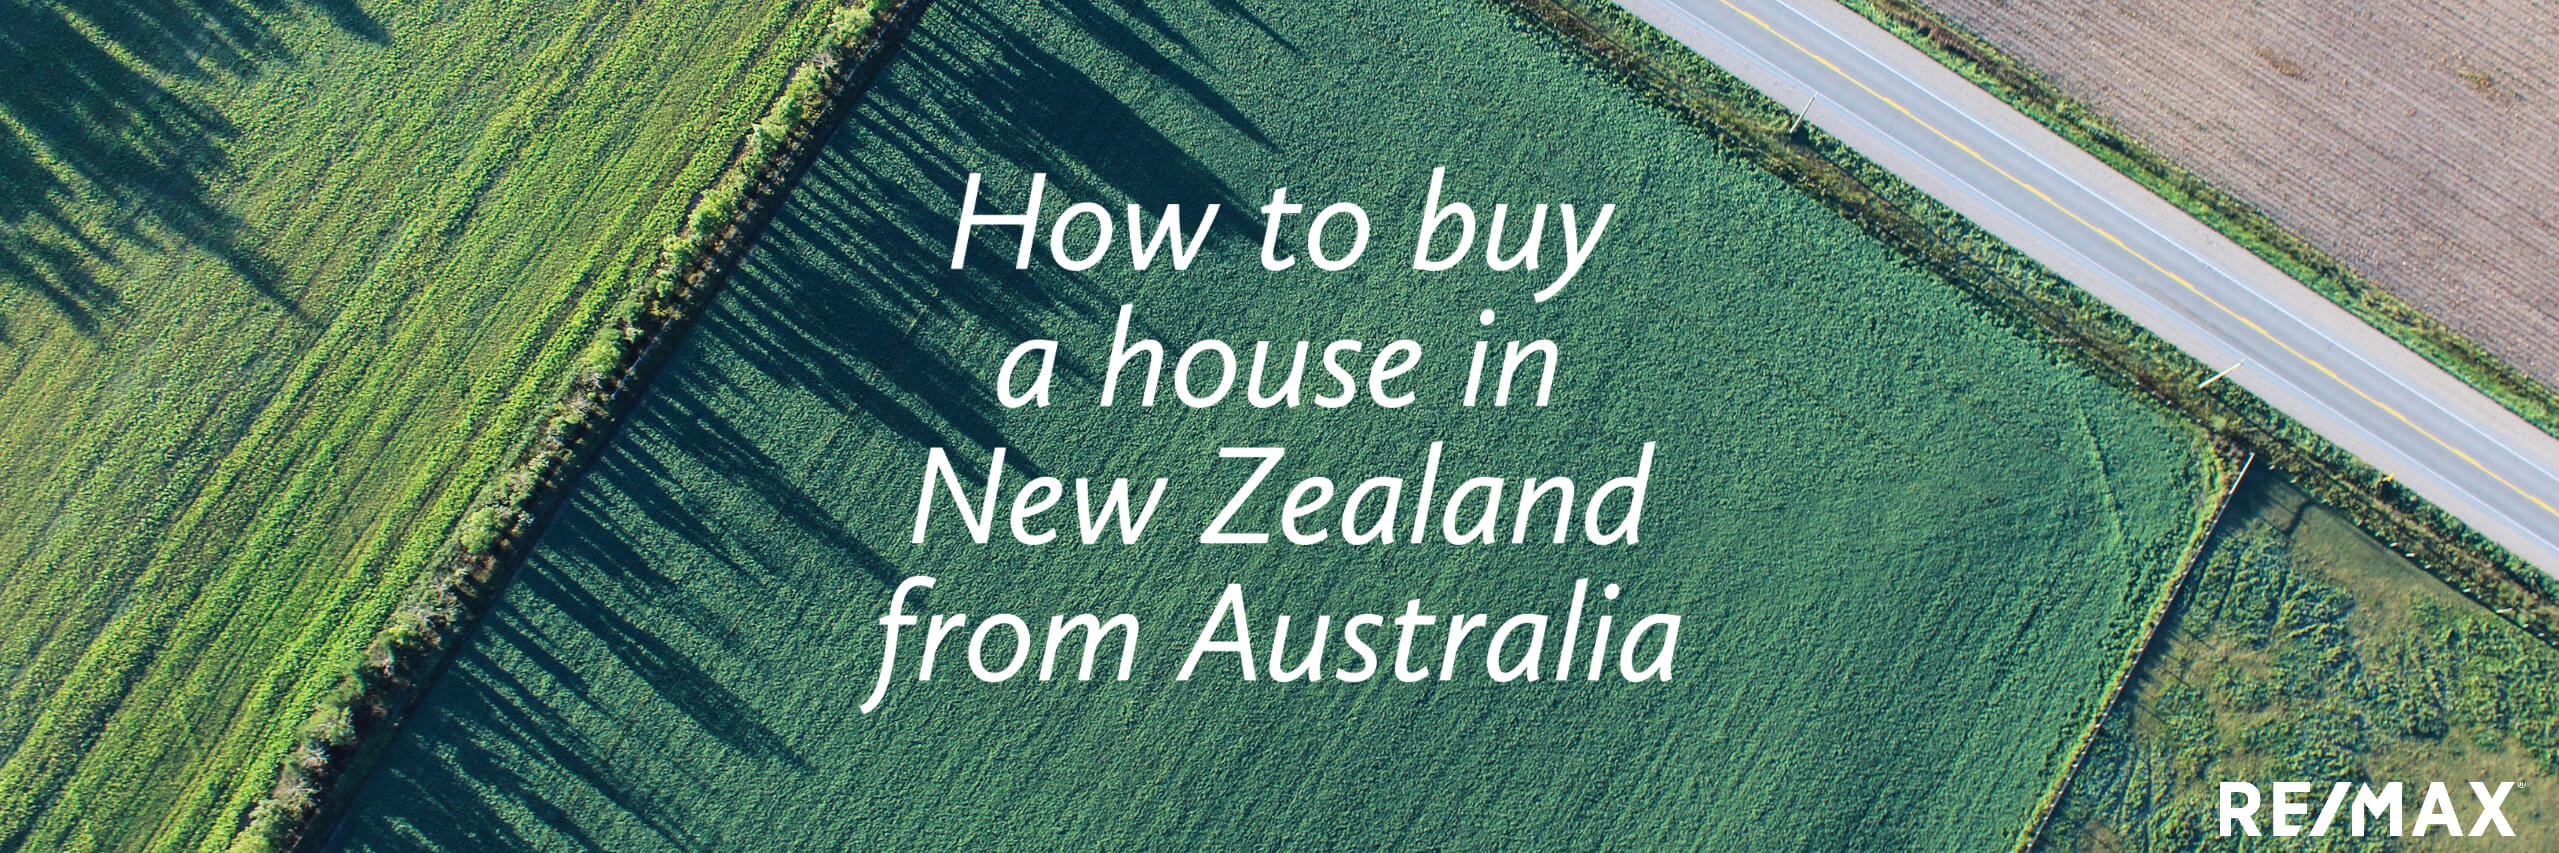 How to Buy a House in New Zealand from Australia RE/MAX Australia